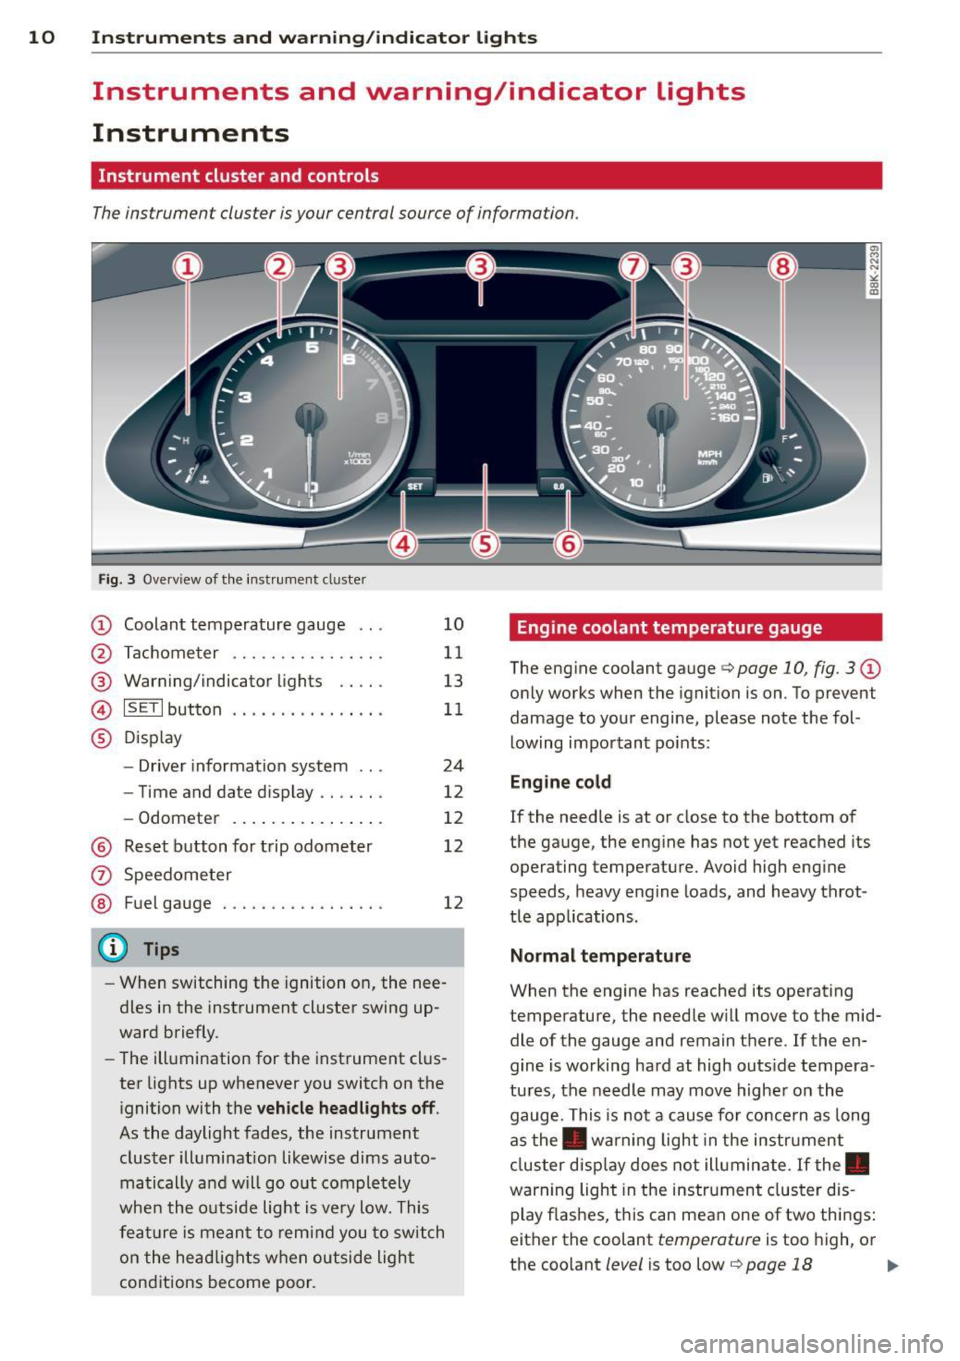 AUDI A4 SEDAN 2013 User Guide 10  Instruments and  warning/indicator  lights 
Instruments  and  warning/indicator  Lights 
Instruments 
Instrument  cluster  and  controls 
The instrument  cluster  is your  central  source of  info